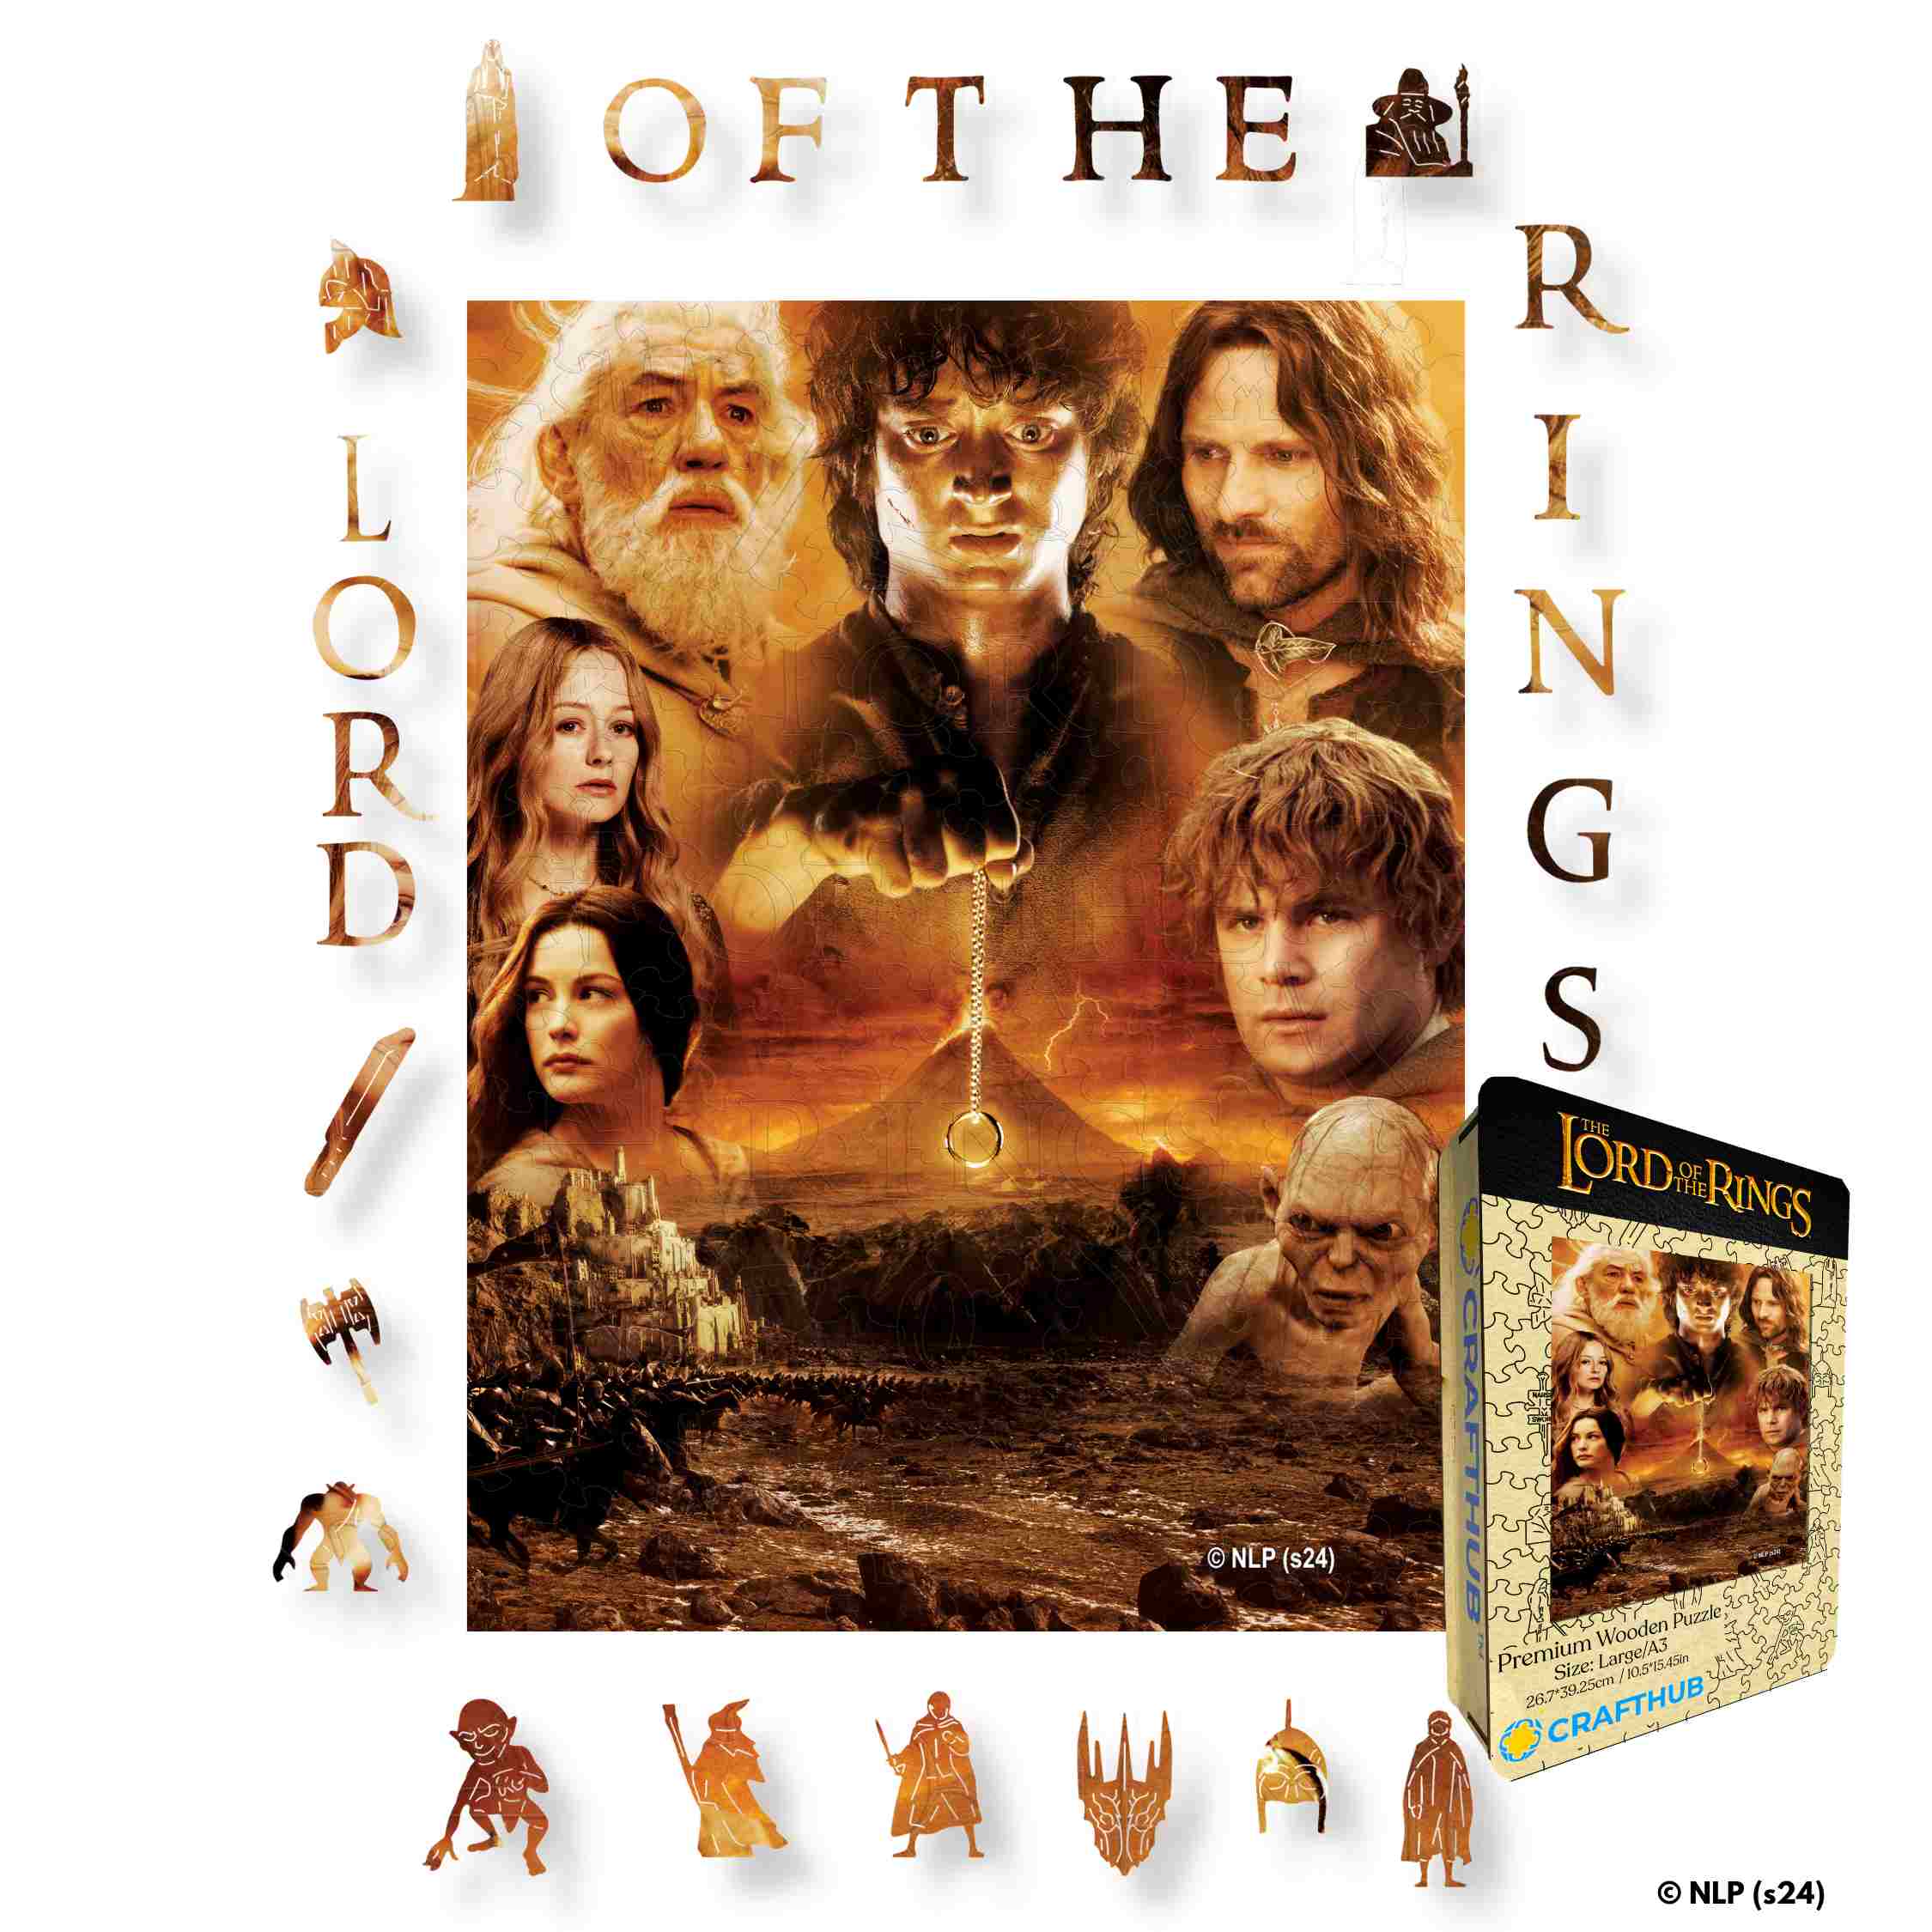 Animal Jigsaw Puzzle > Wooden Jigsaw Puzzle > Jigsaw Puzzle The Lord of the Rings - Wooden Jigsaw Puzzle